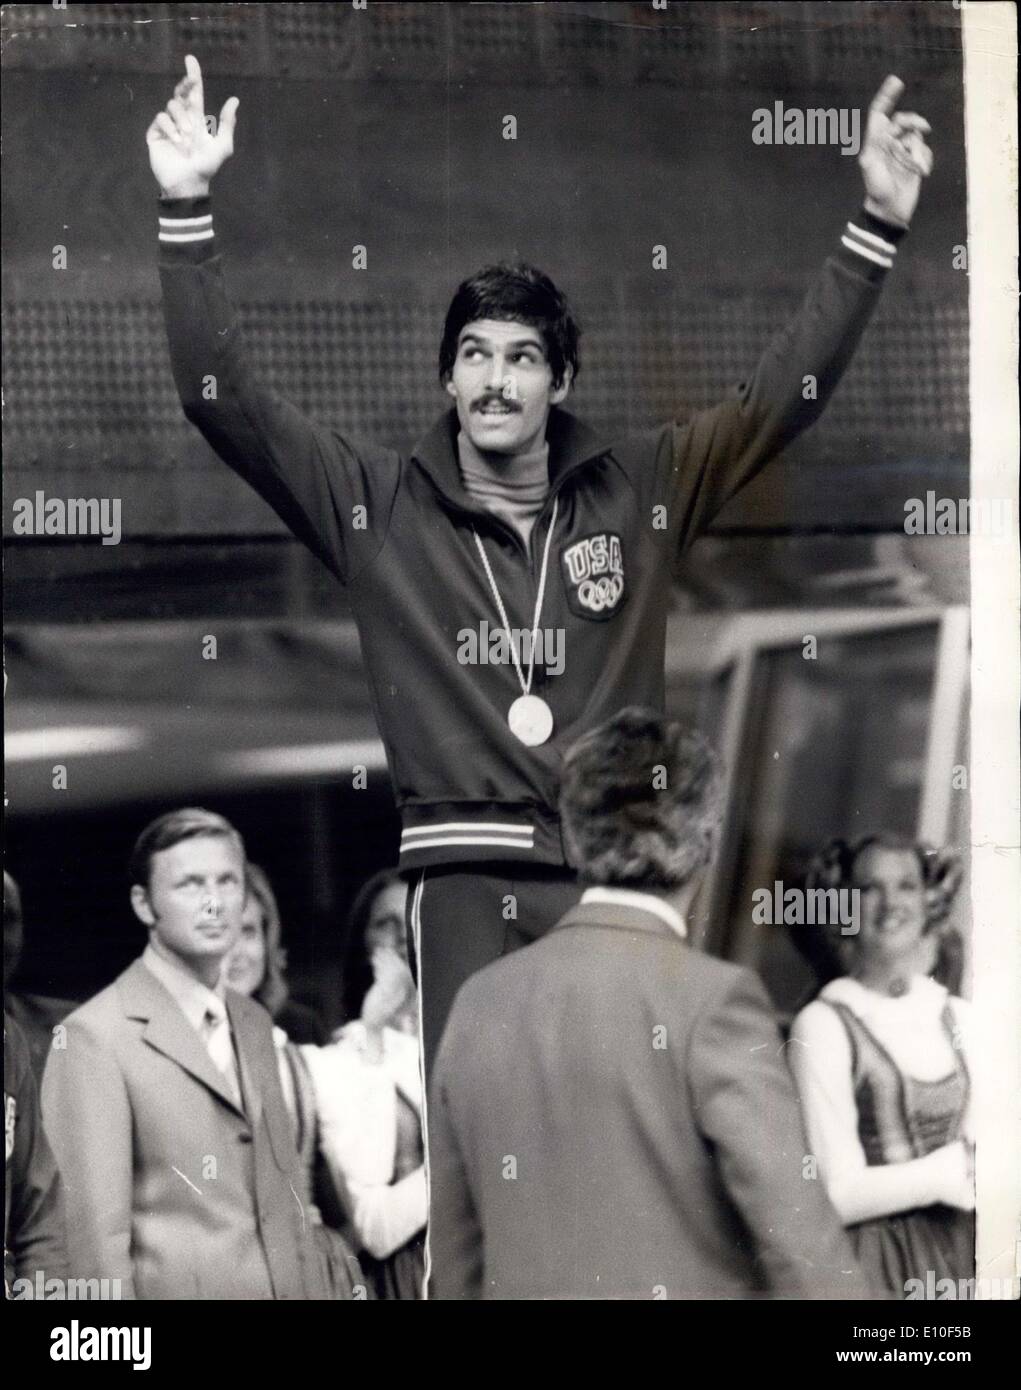 Sep. 04, 1972 - Olympic Games in Munich, swimming, Mark Spitz wins his fifth gold medal: Mark Spitz of American raises his arms Stock Photo